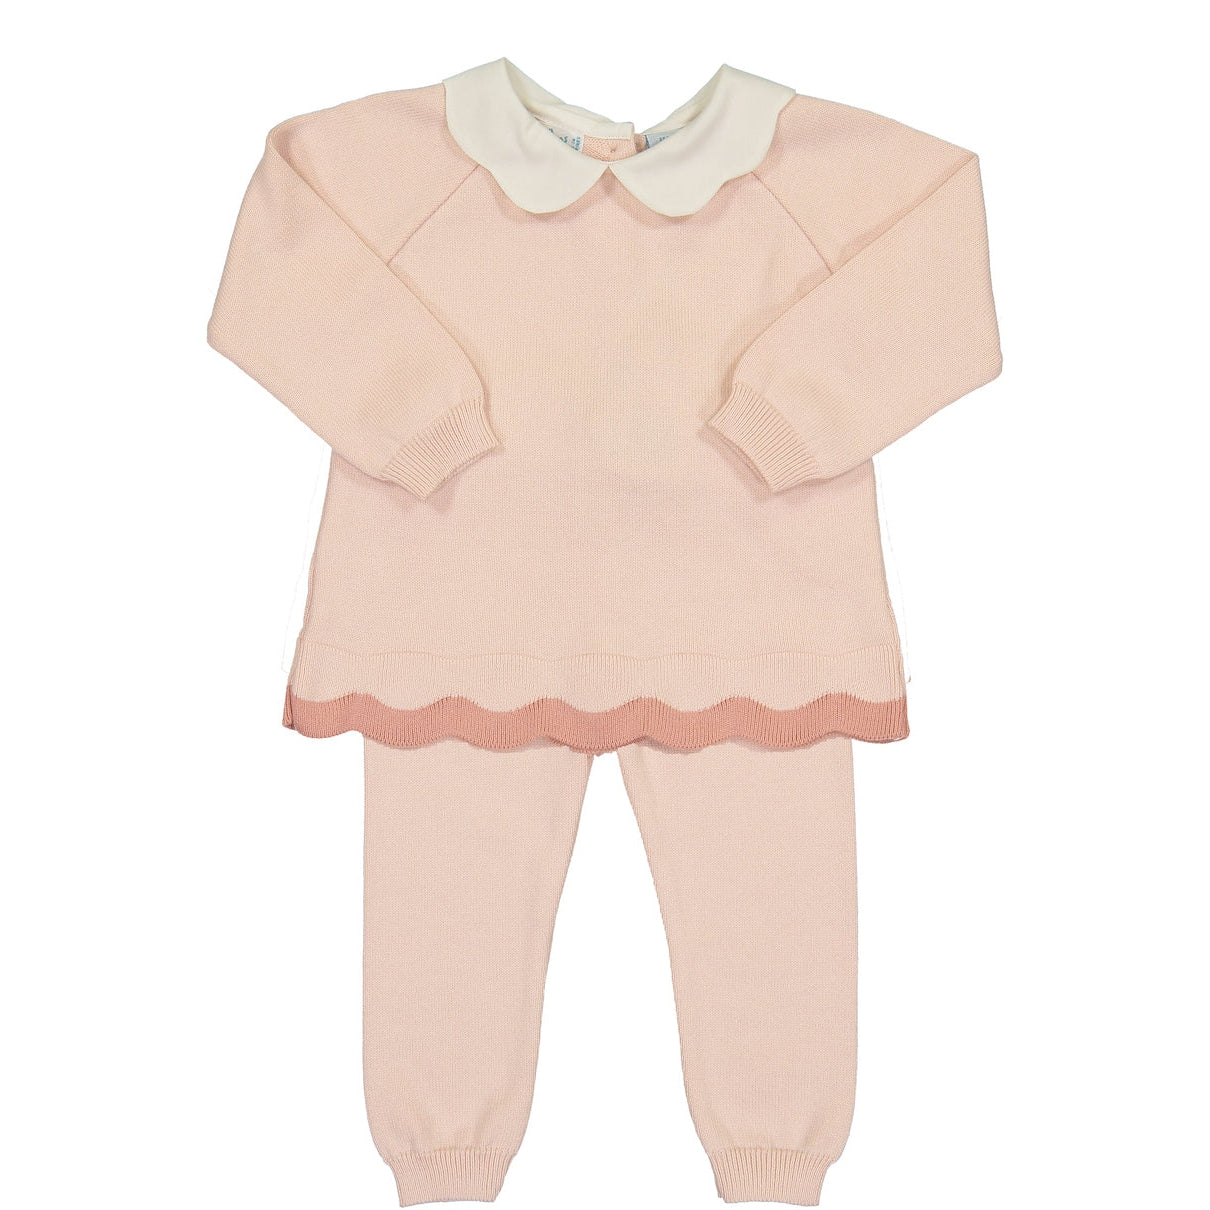 Feltman Brothers Scalloped Contrast Trim Knit Set in Blush